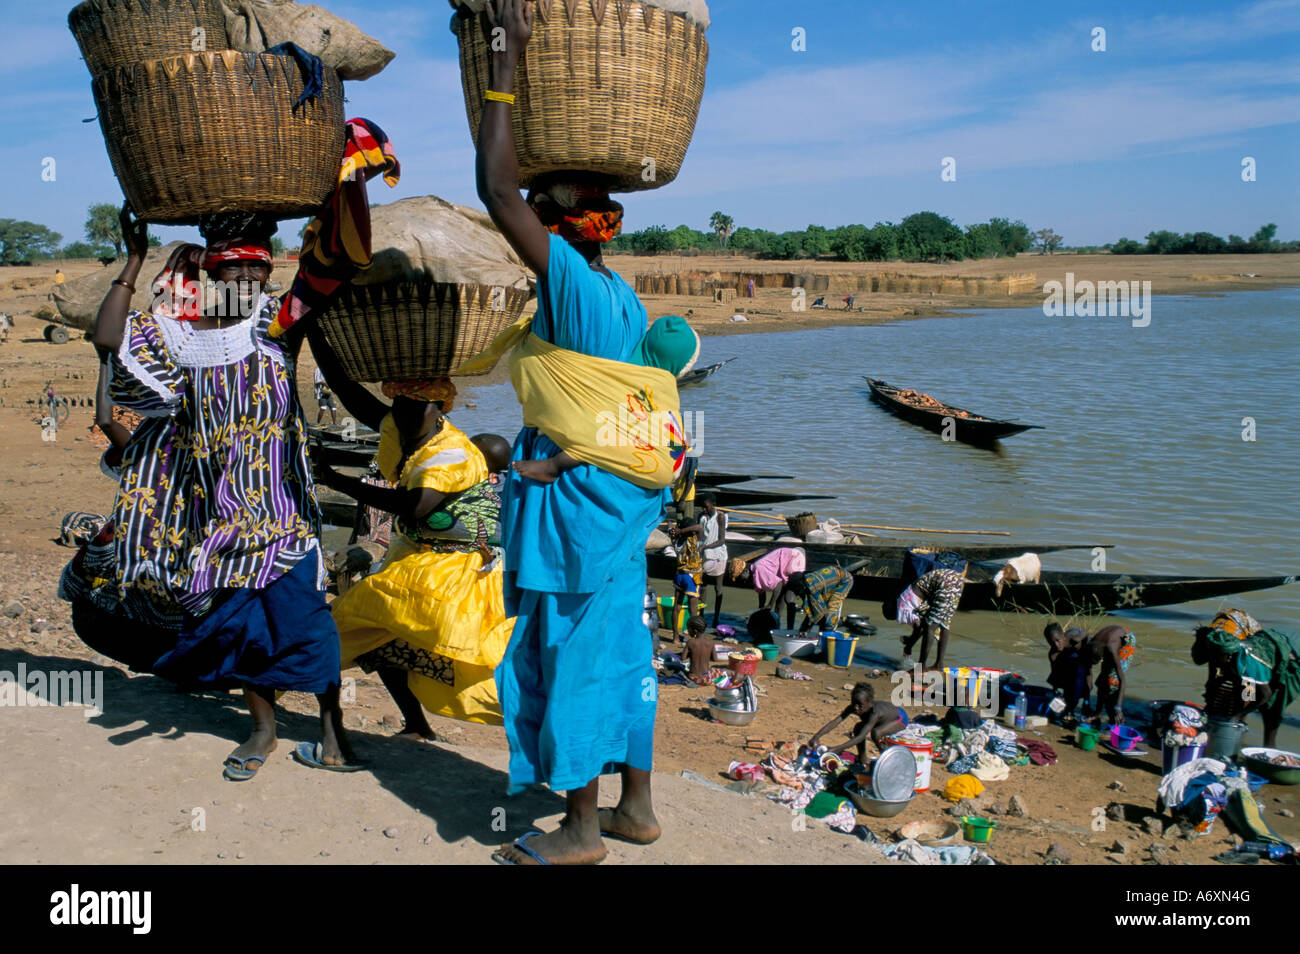 Women with baskets of laundry on their heads beside the river Djenne Mali Africa Stock Photo